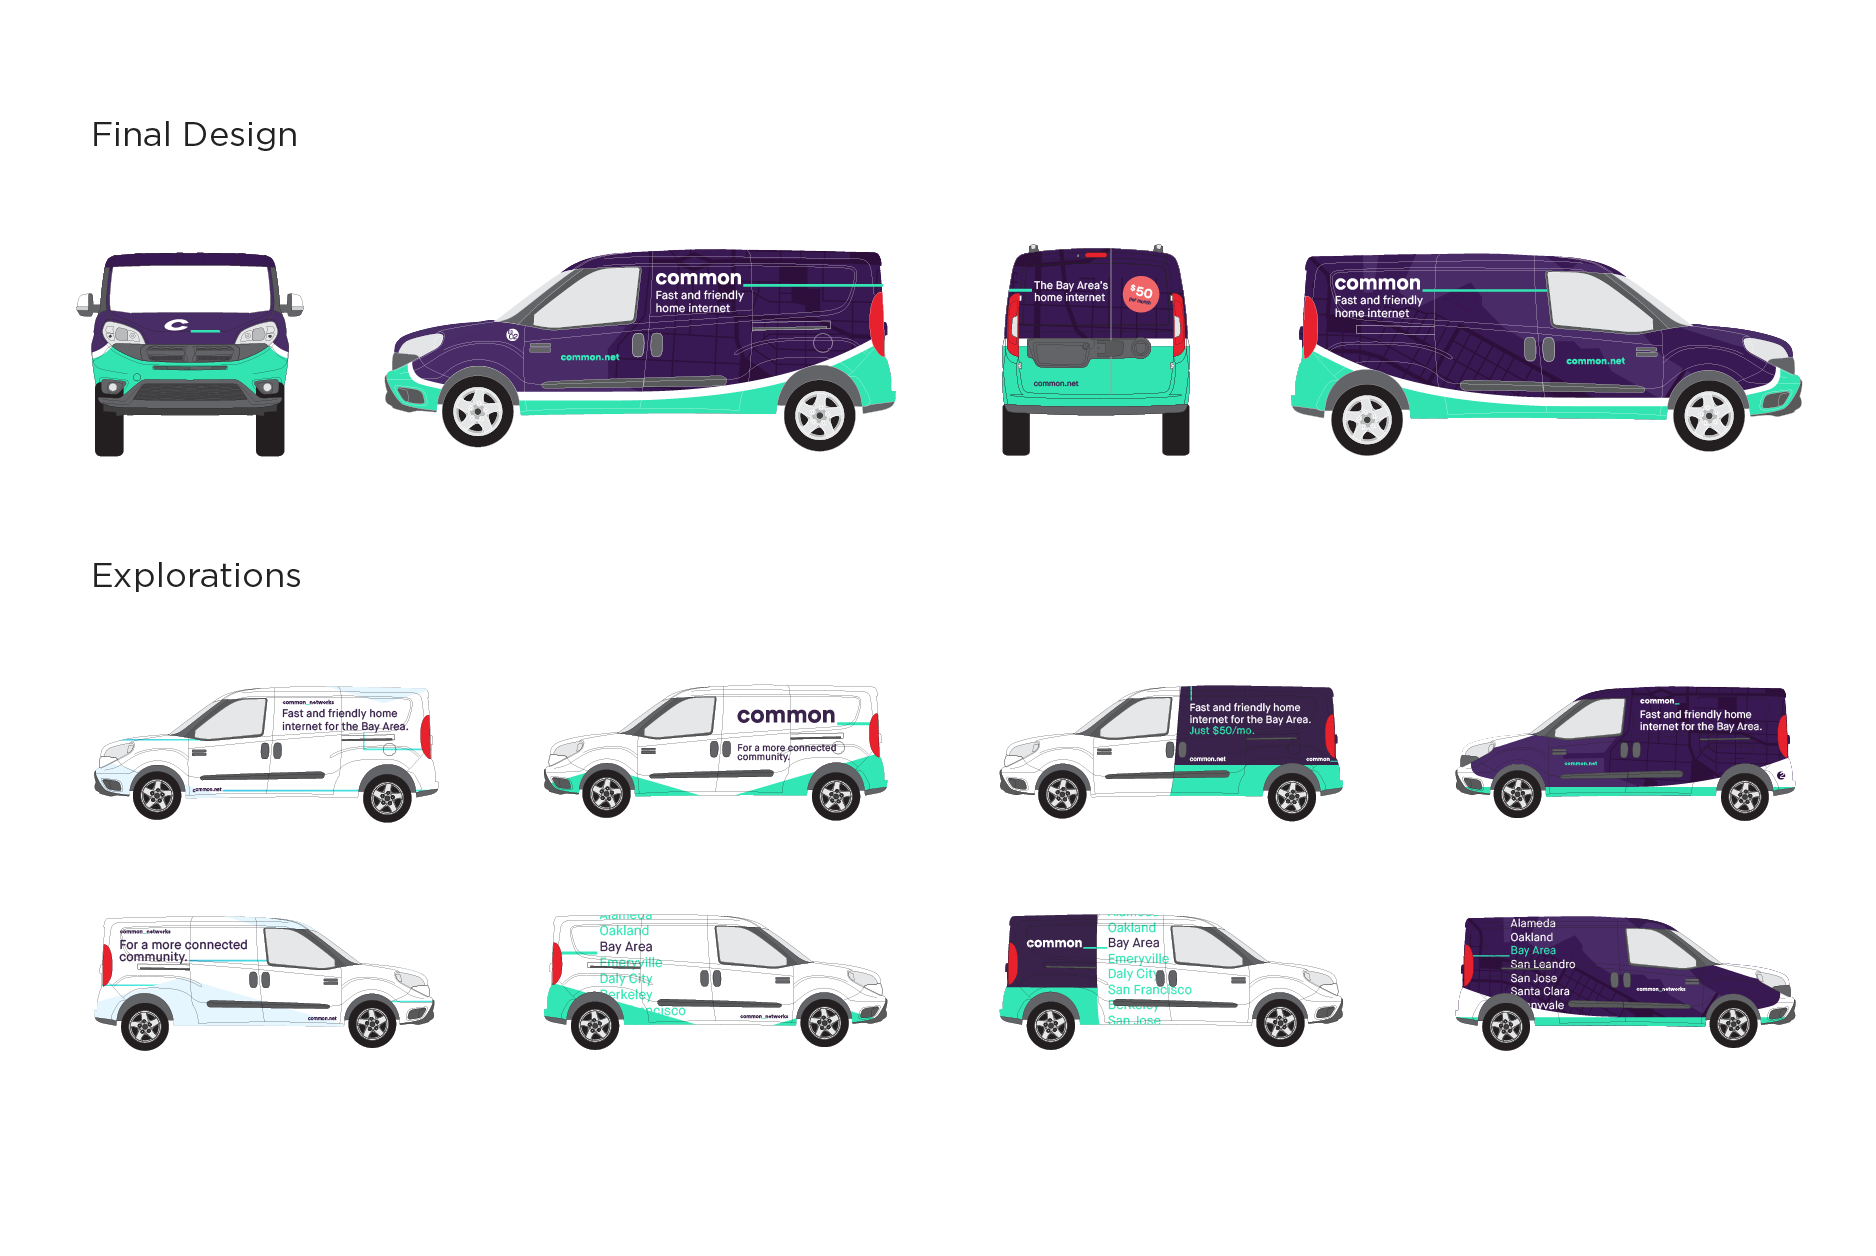 Final van wrap designs followed by array of earlier designs and iterations.